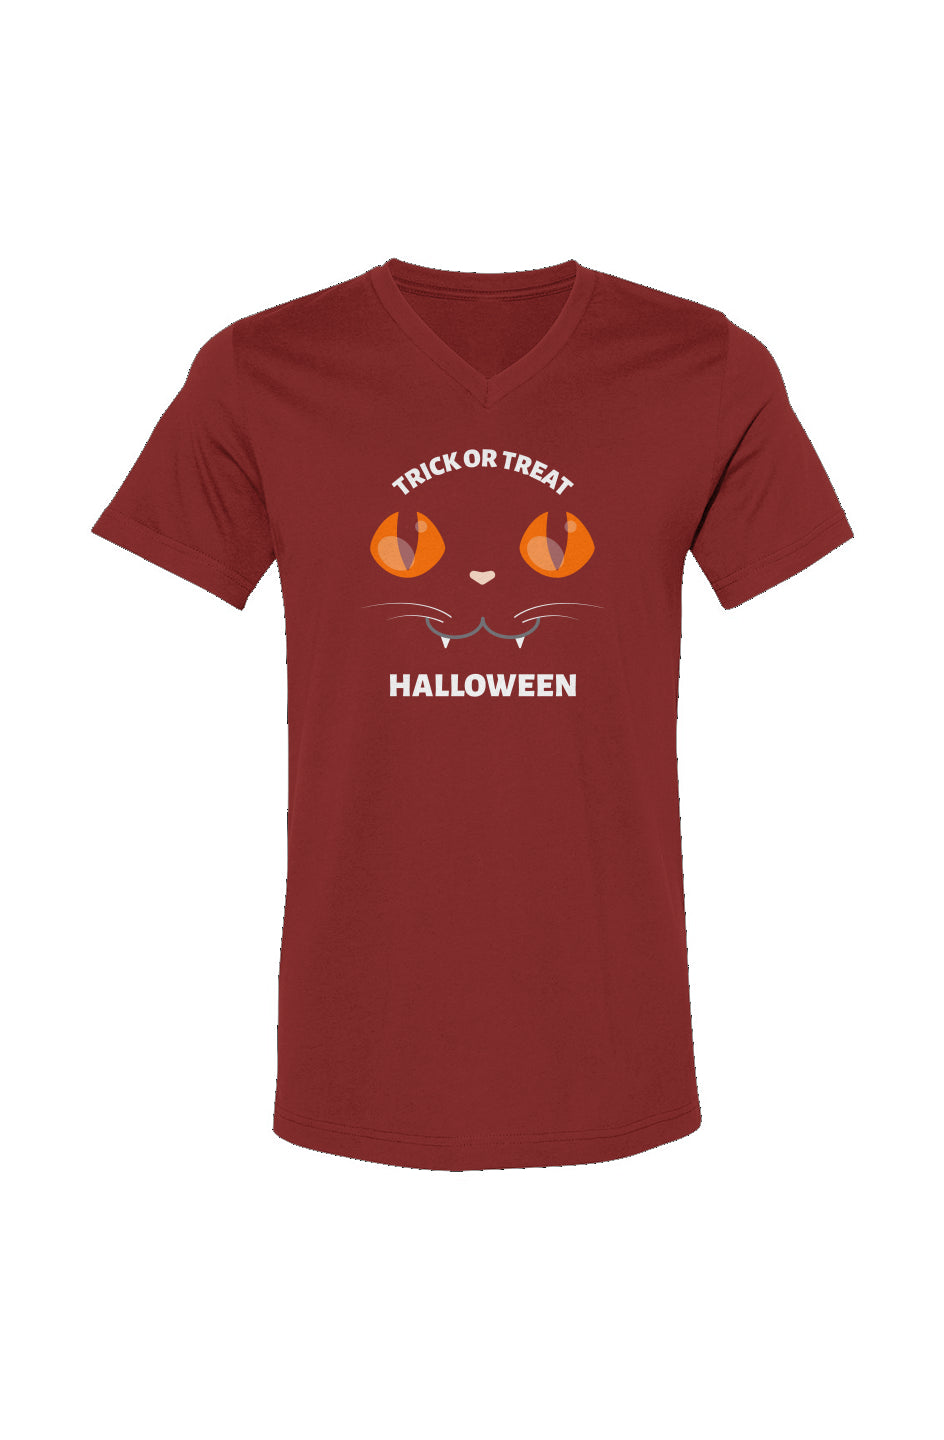 "Trick Or Treat Halloween" Unisex Fit